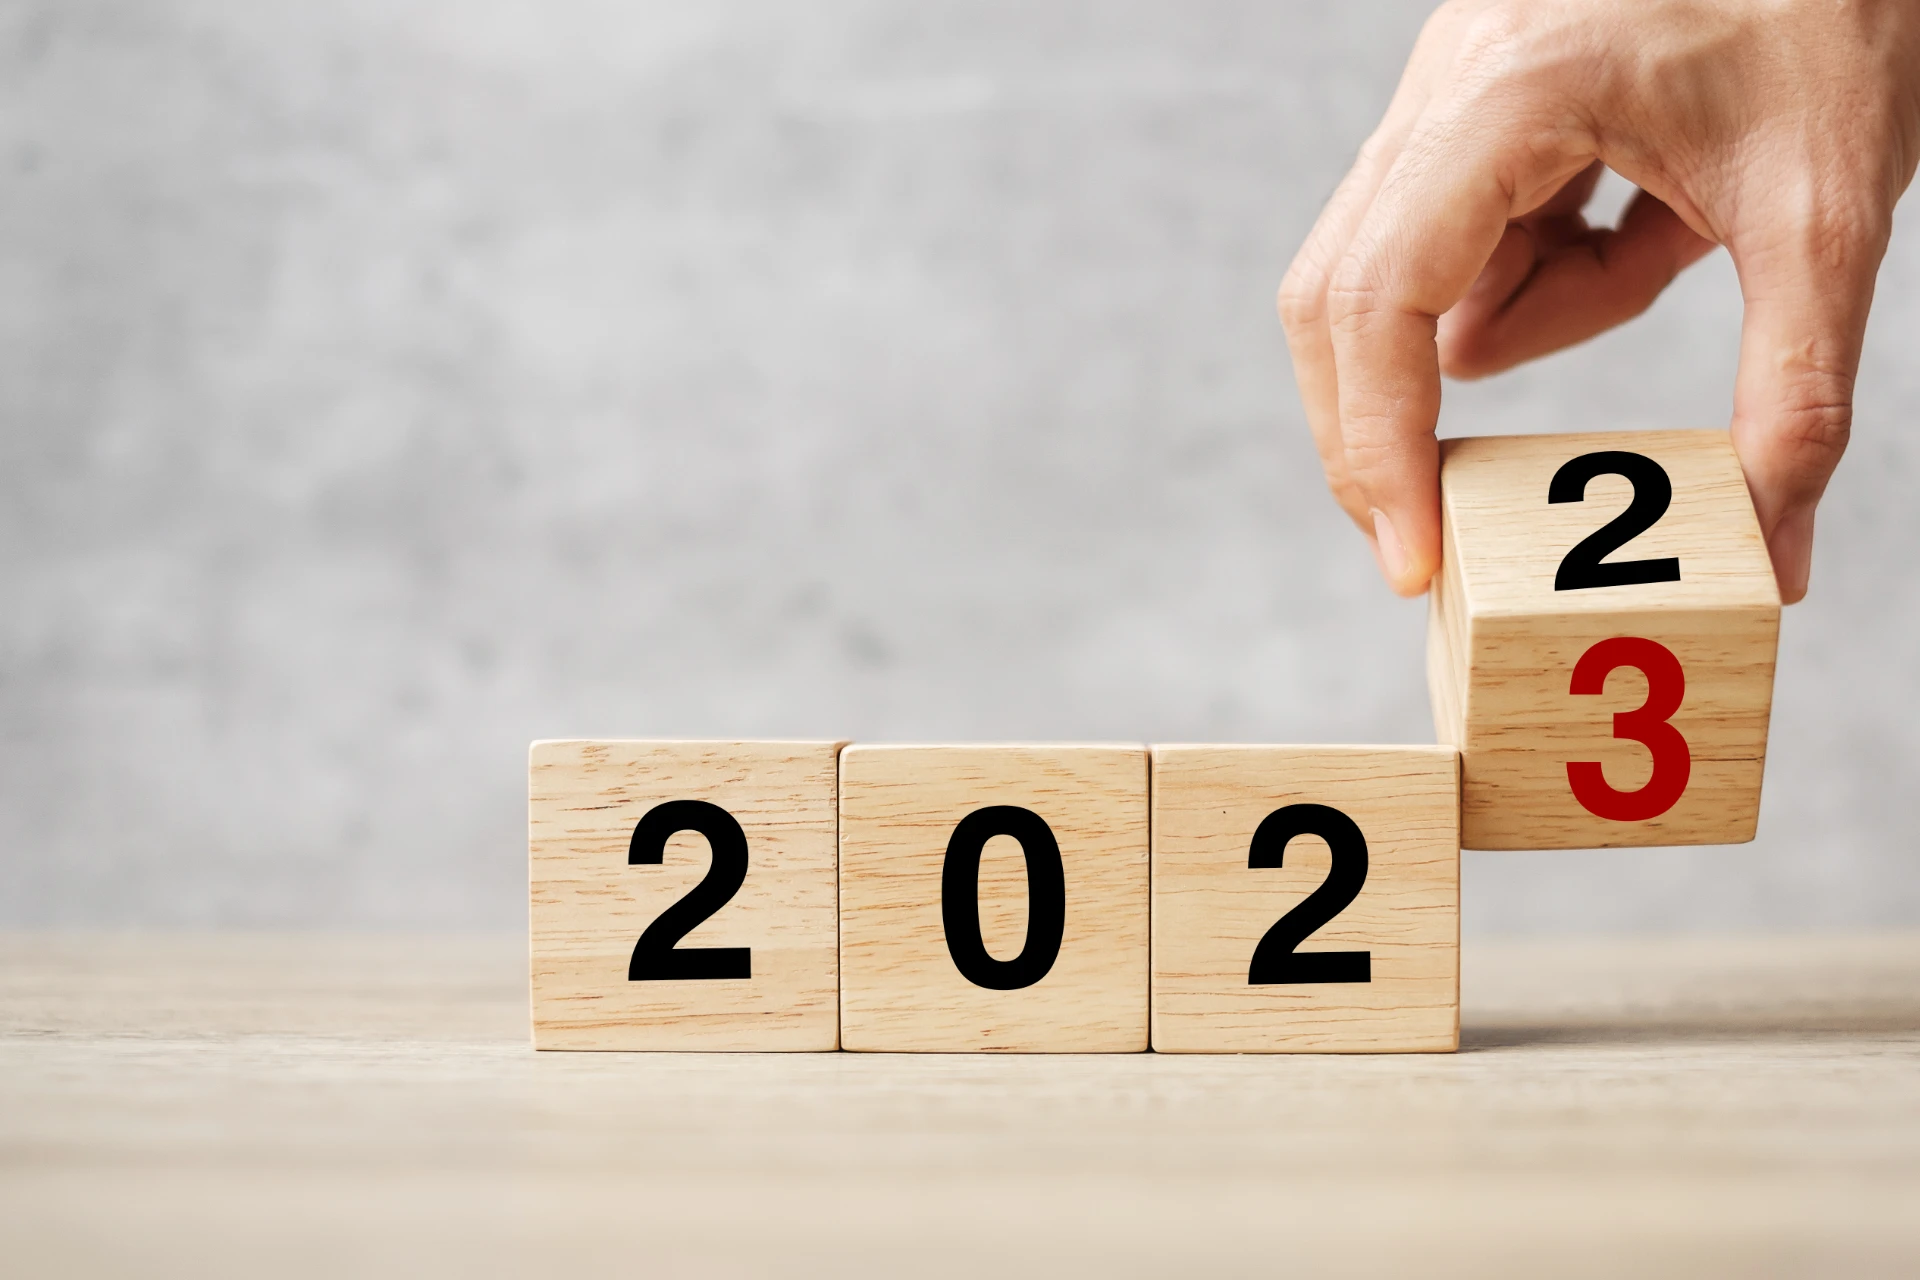 20230503_hand-flipping-block-2022-to-2023-text-on-table-resolution-strategy-plan-goal-motivation-reboot-business-and-new-year-holiday-concepts.webp